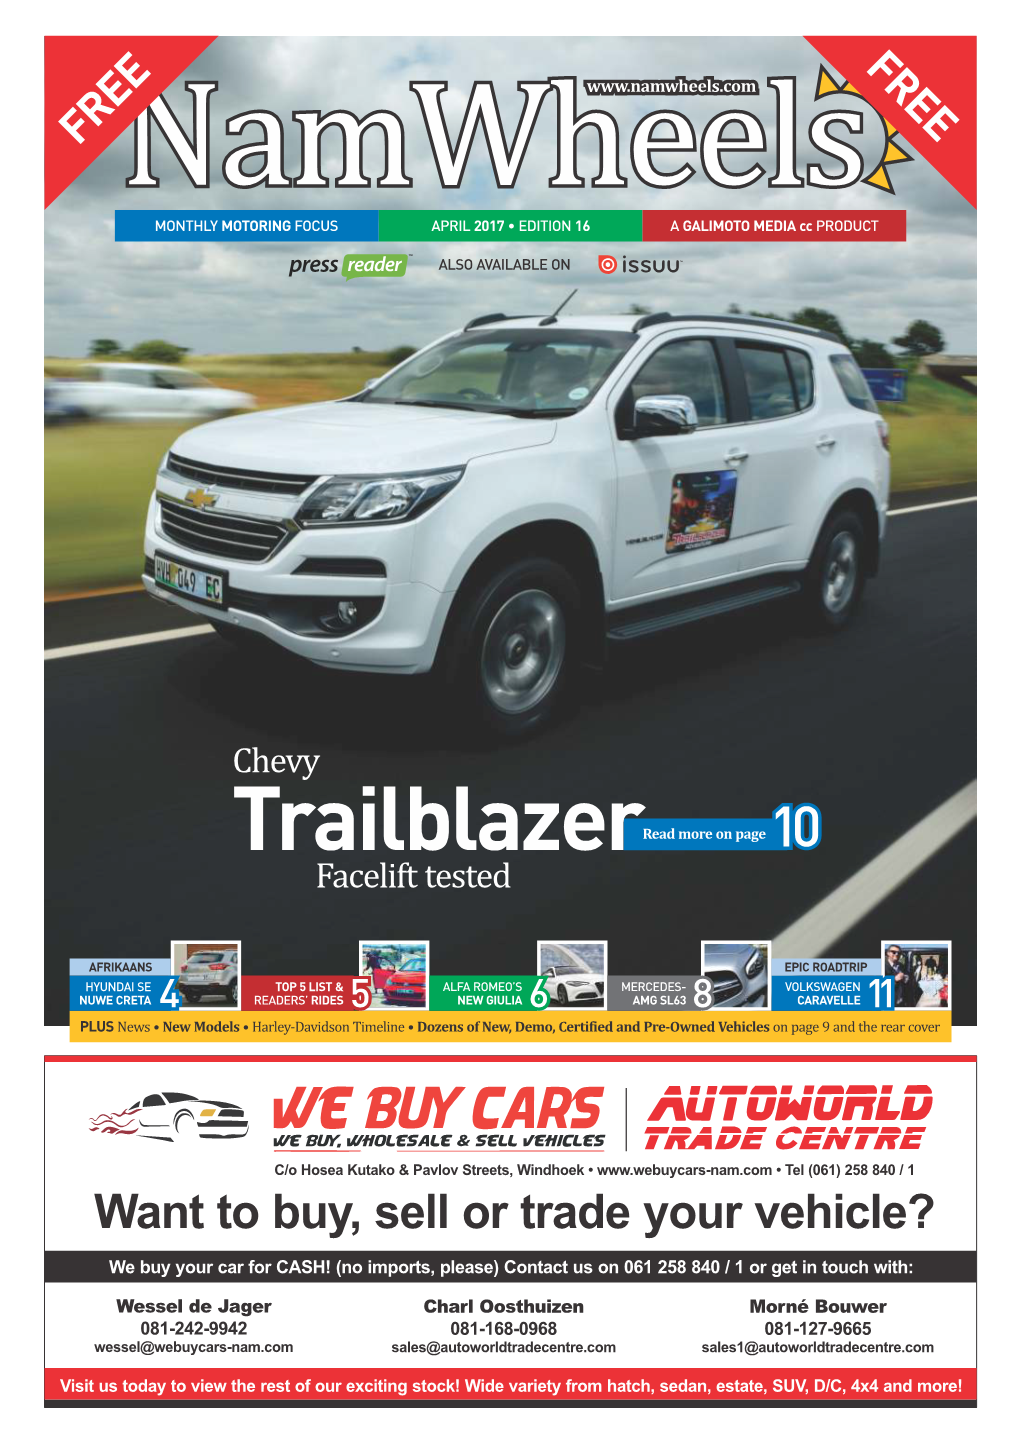 Want to Buy, Sell Or Trade Your Vehicle?